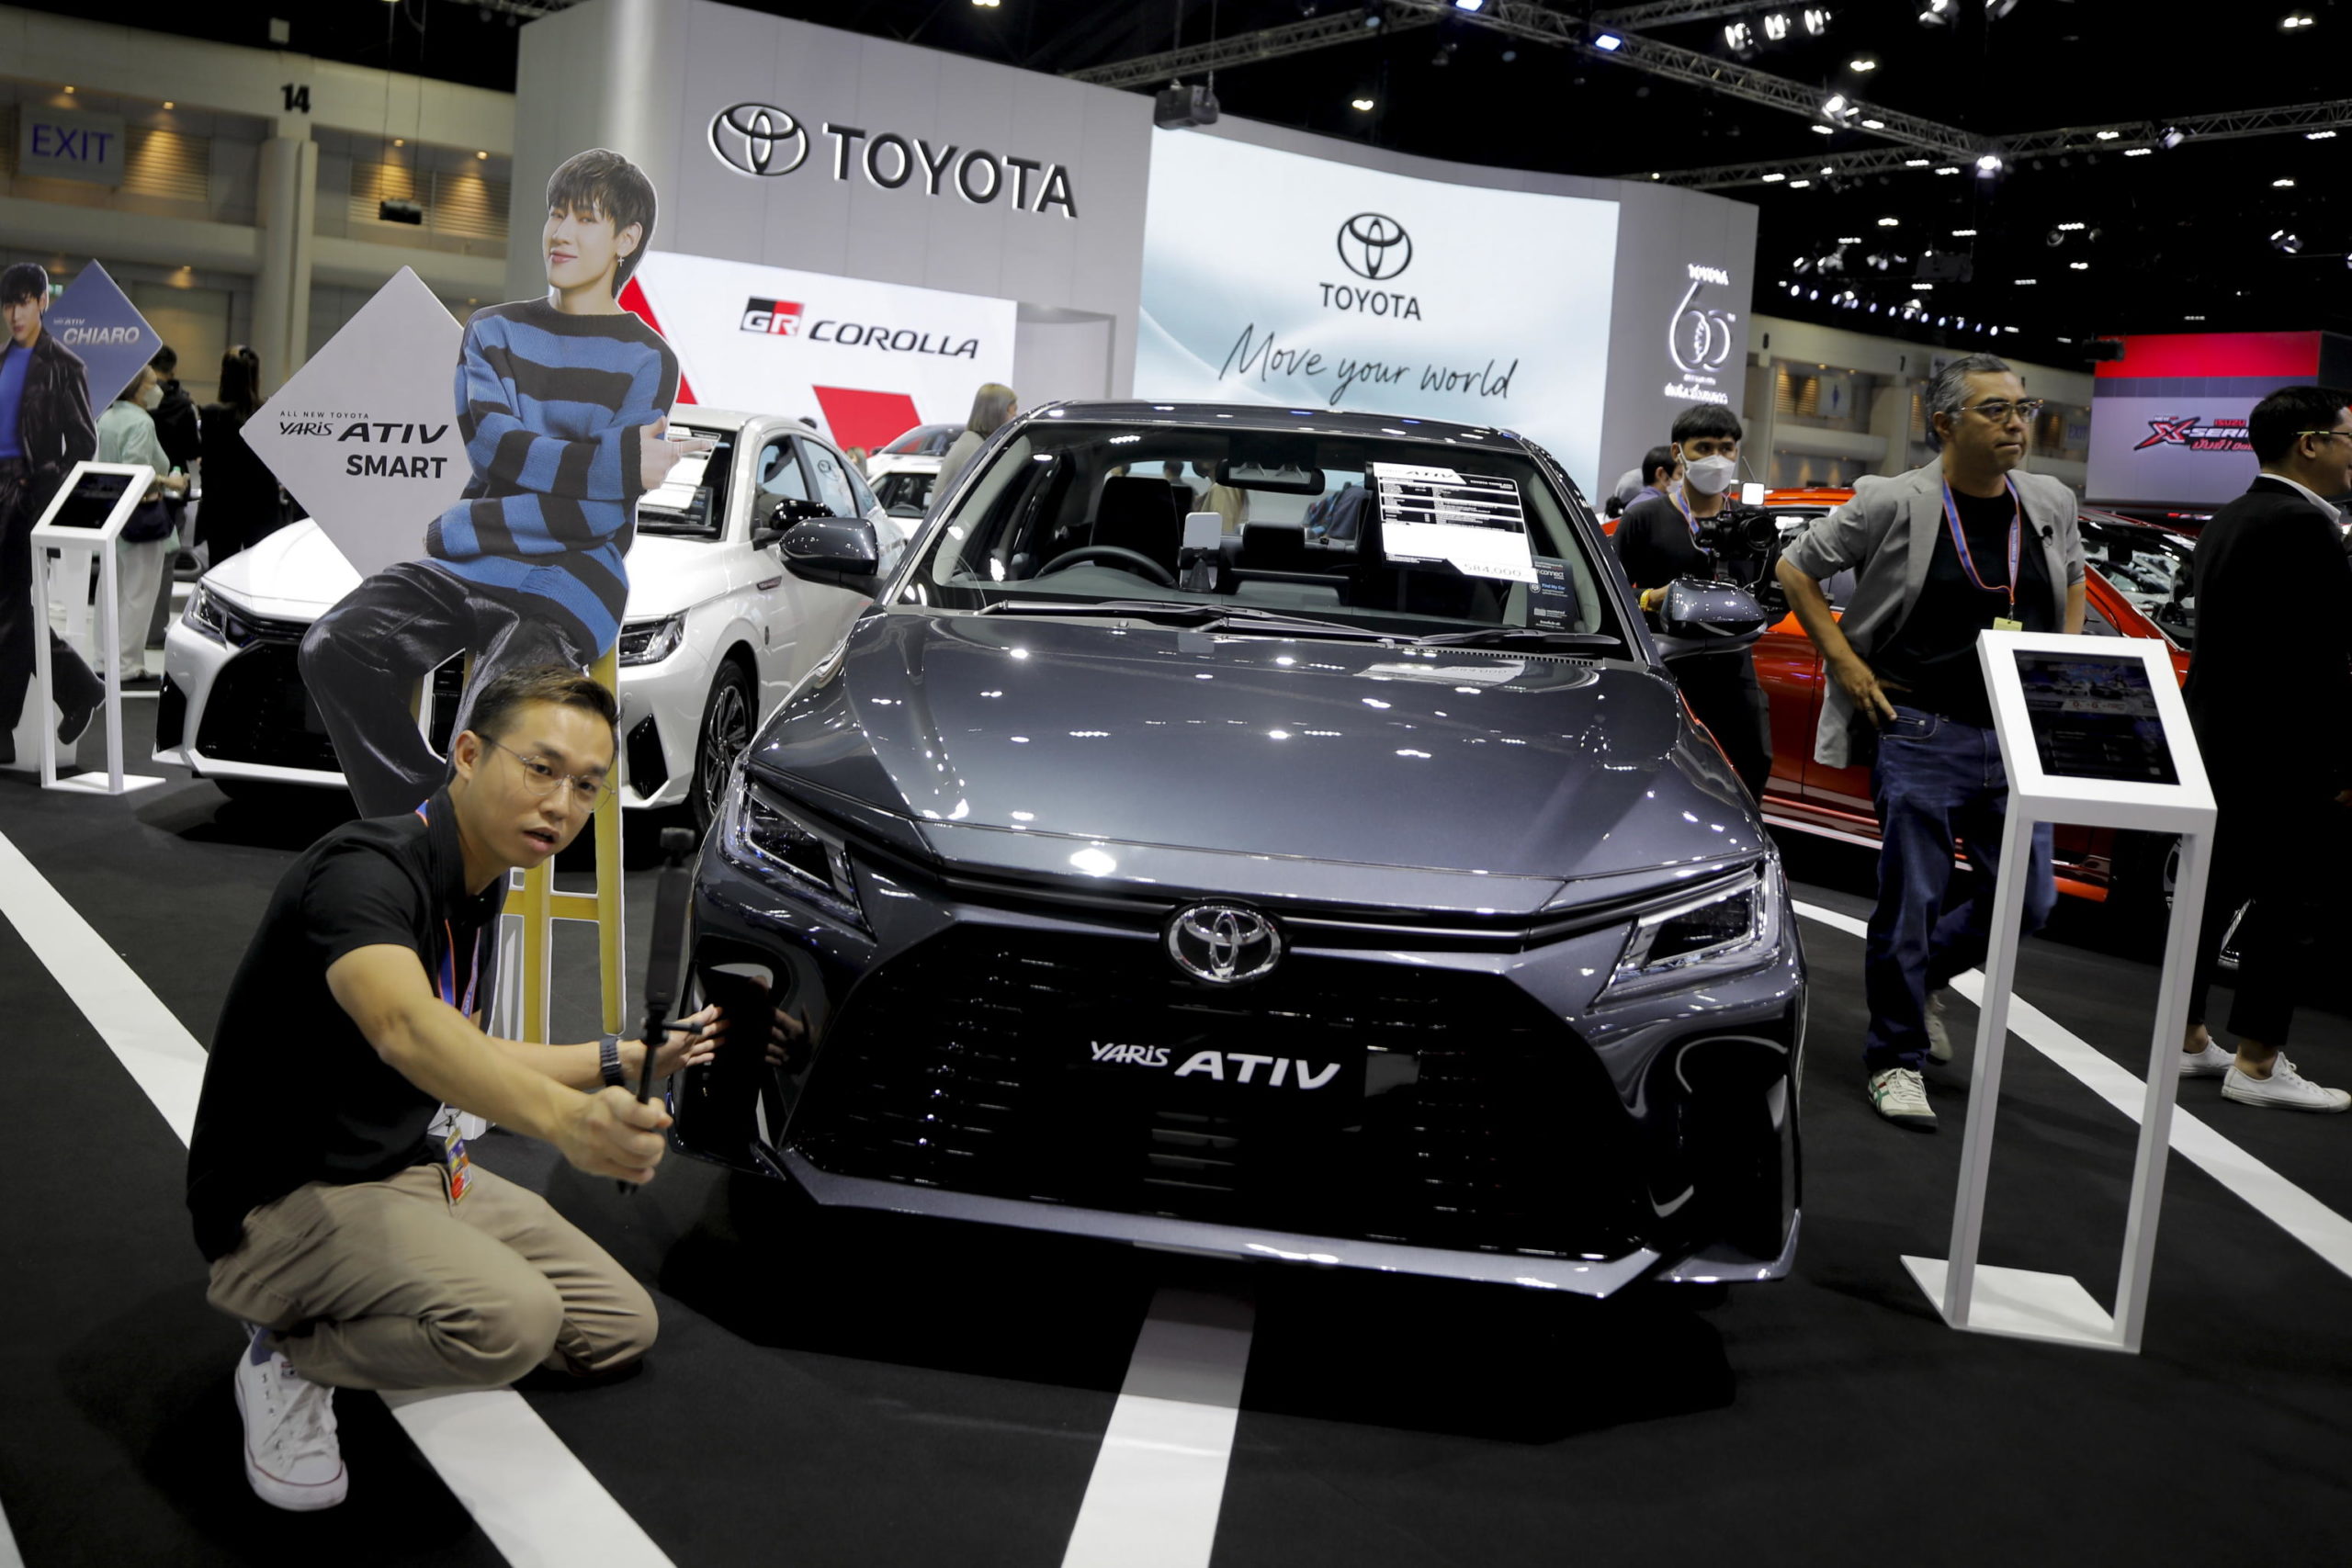 epa10338452 A reporter films next to a Toyota Yaris Ativ during the media day of the 39th Thailand International Motor Expo 2022 in Bangkok, Thailand, 30 November 2022. More than 30 car brands as well as electric vehicles and motorcycles are showcased at the 12 day expo, running from 01 to 12 December 2022.  EPA/DIEGO AZUBEL